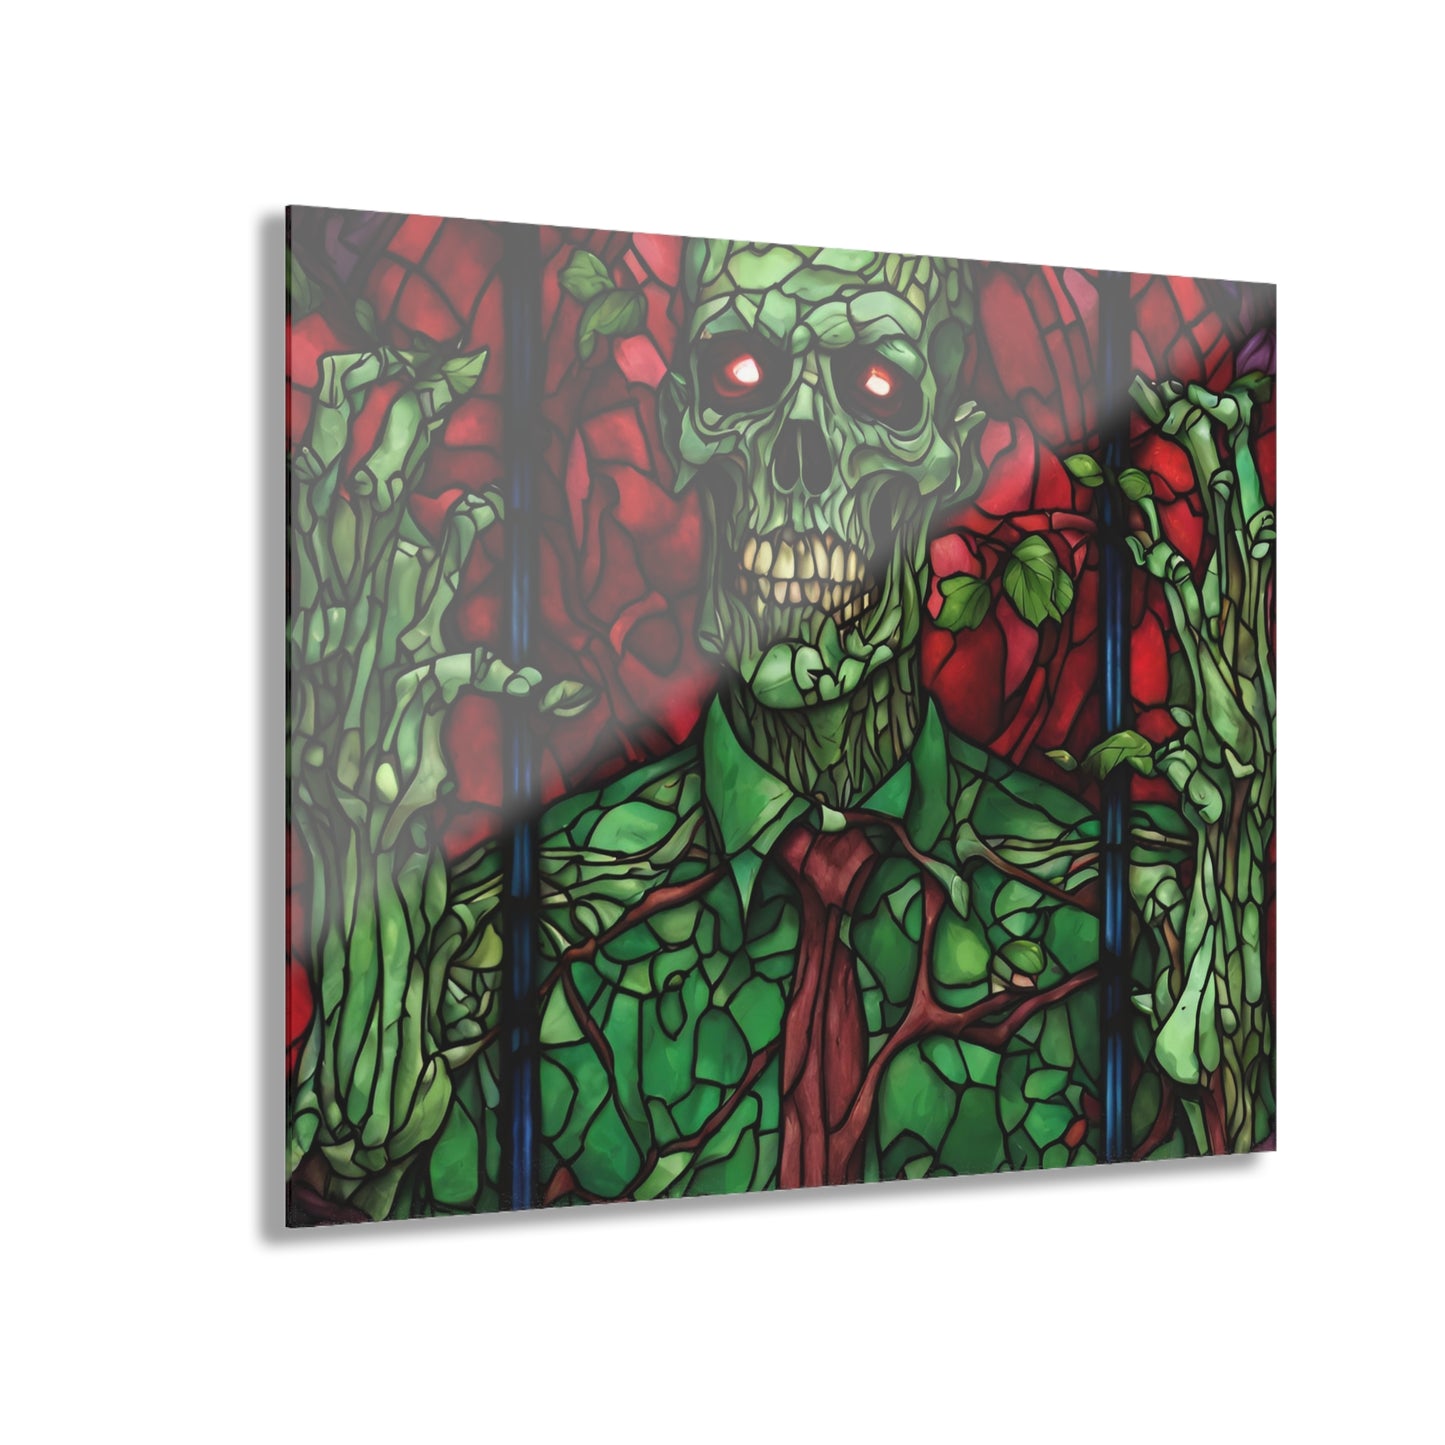 Green Zombie Stained Glass Acrylic Print, Wall Art, Skull and Rose Print